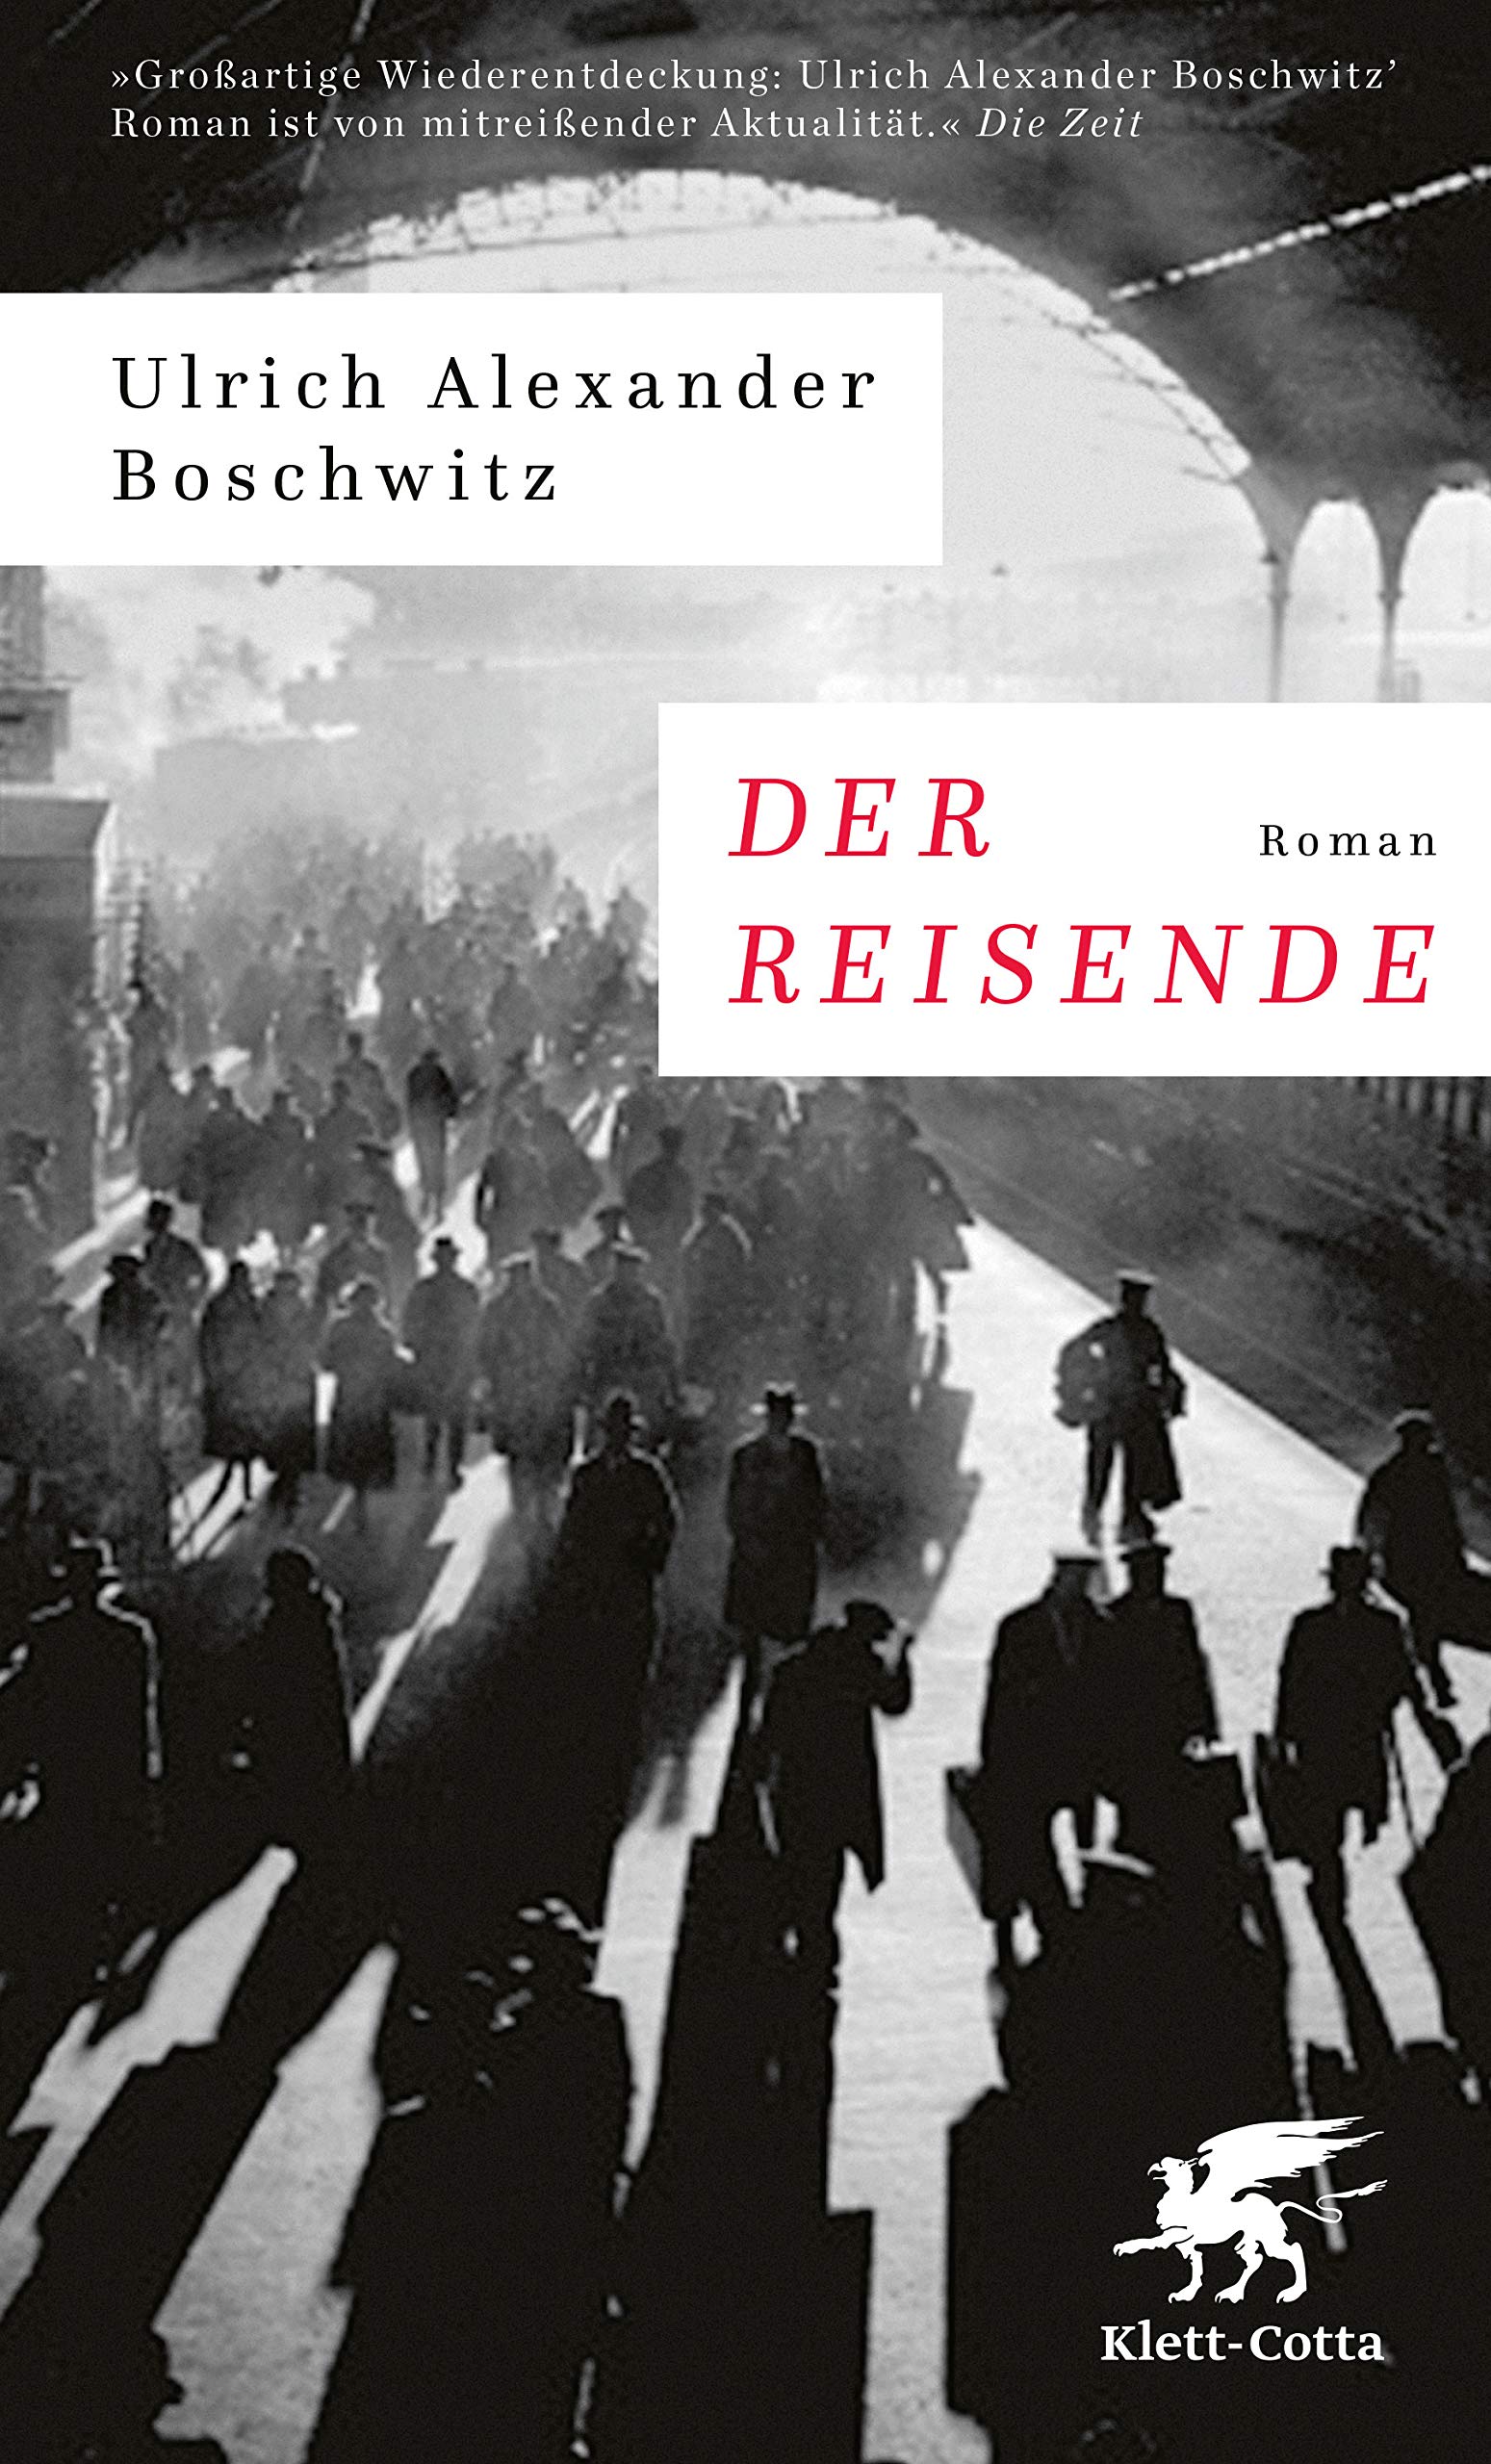 Cover of German edition of 